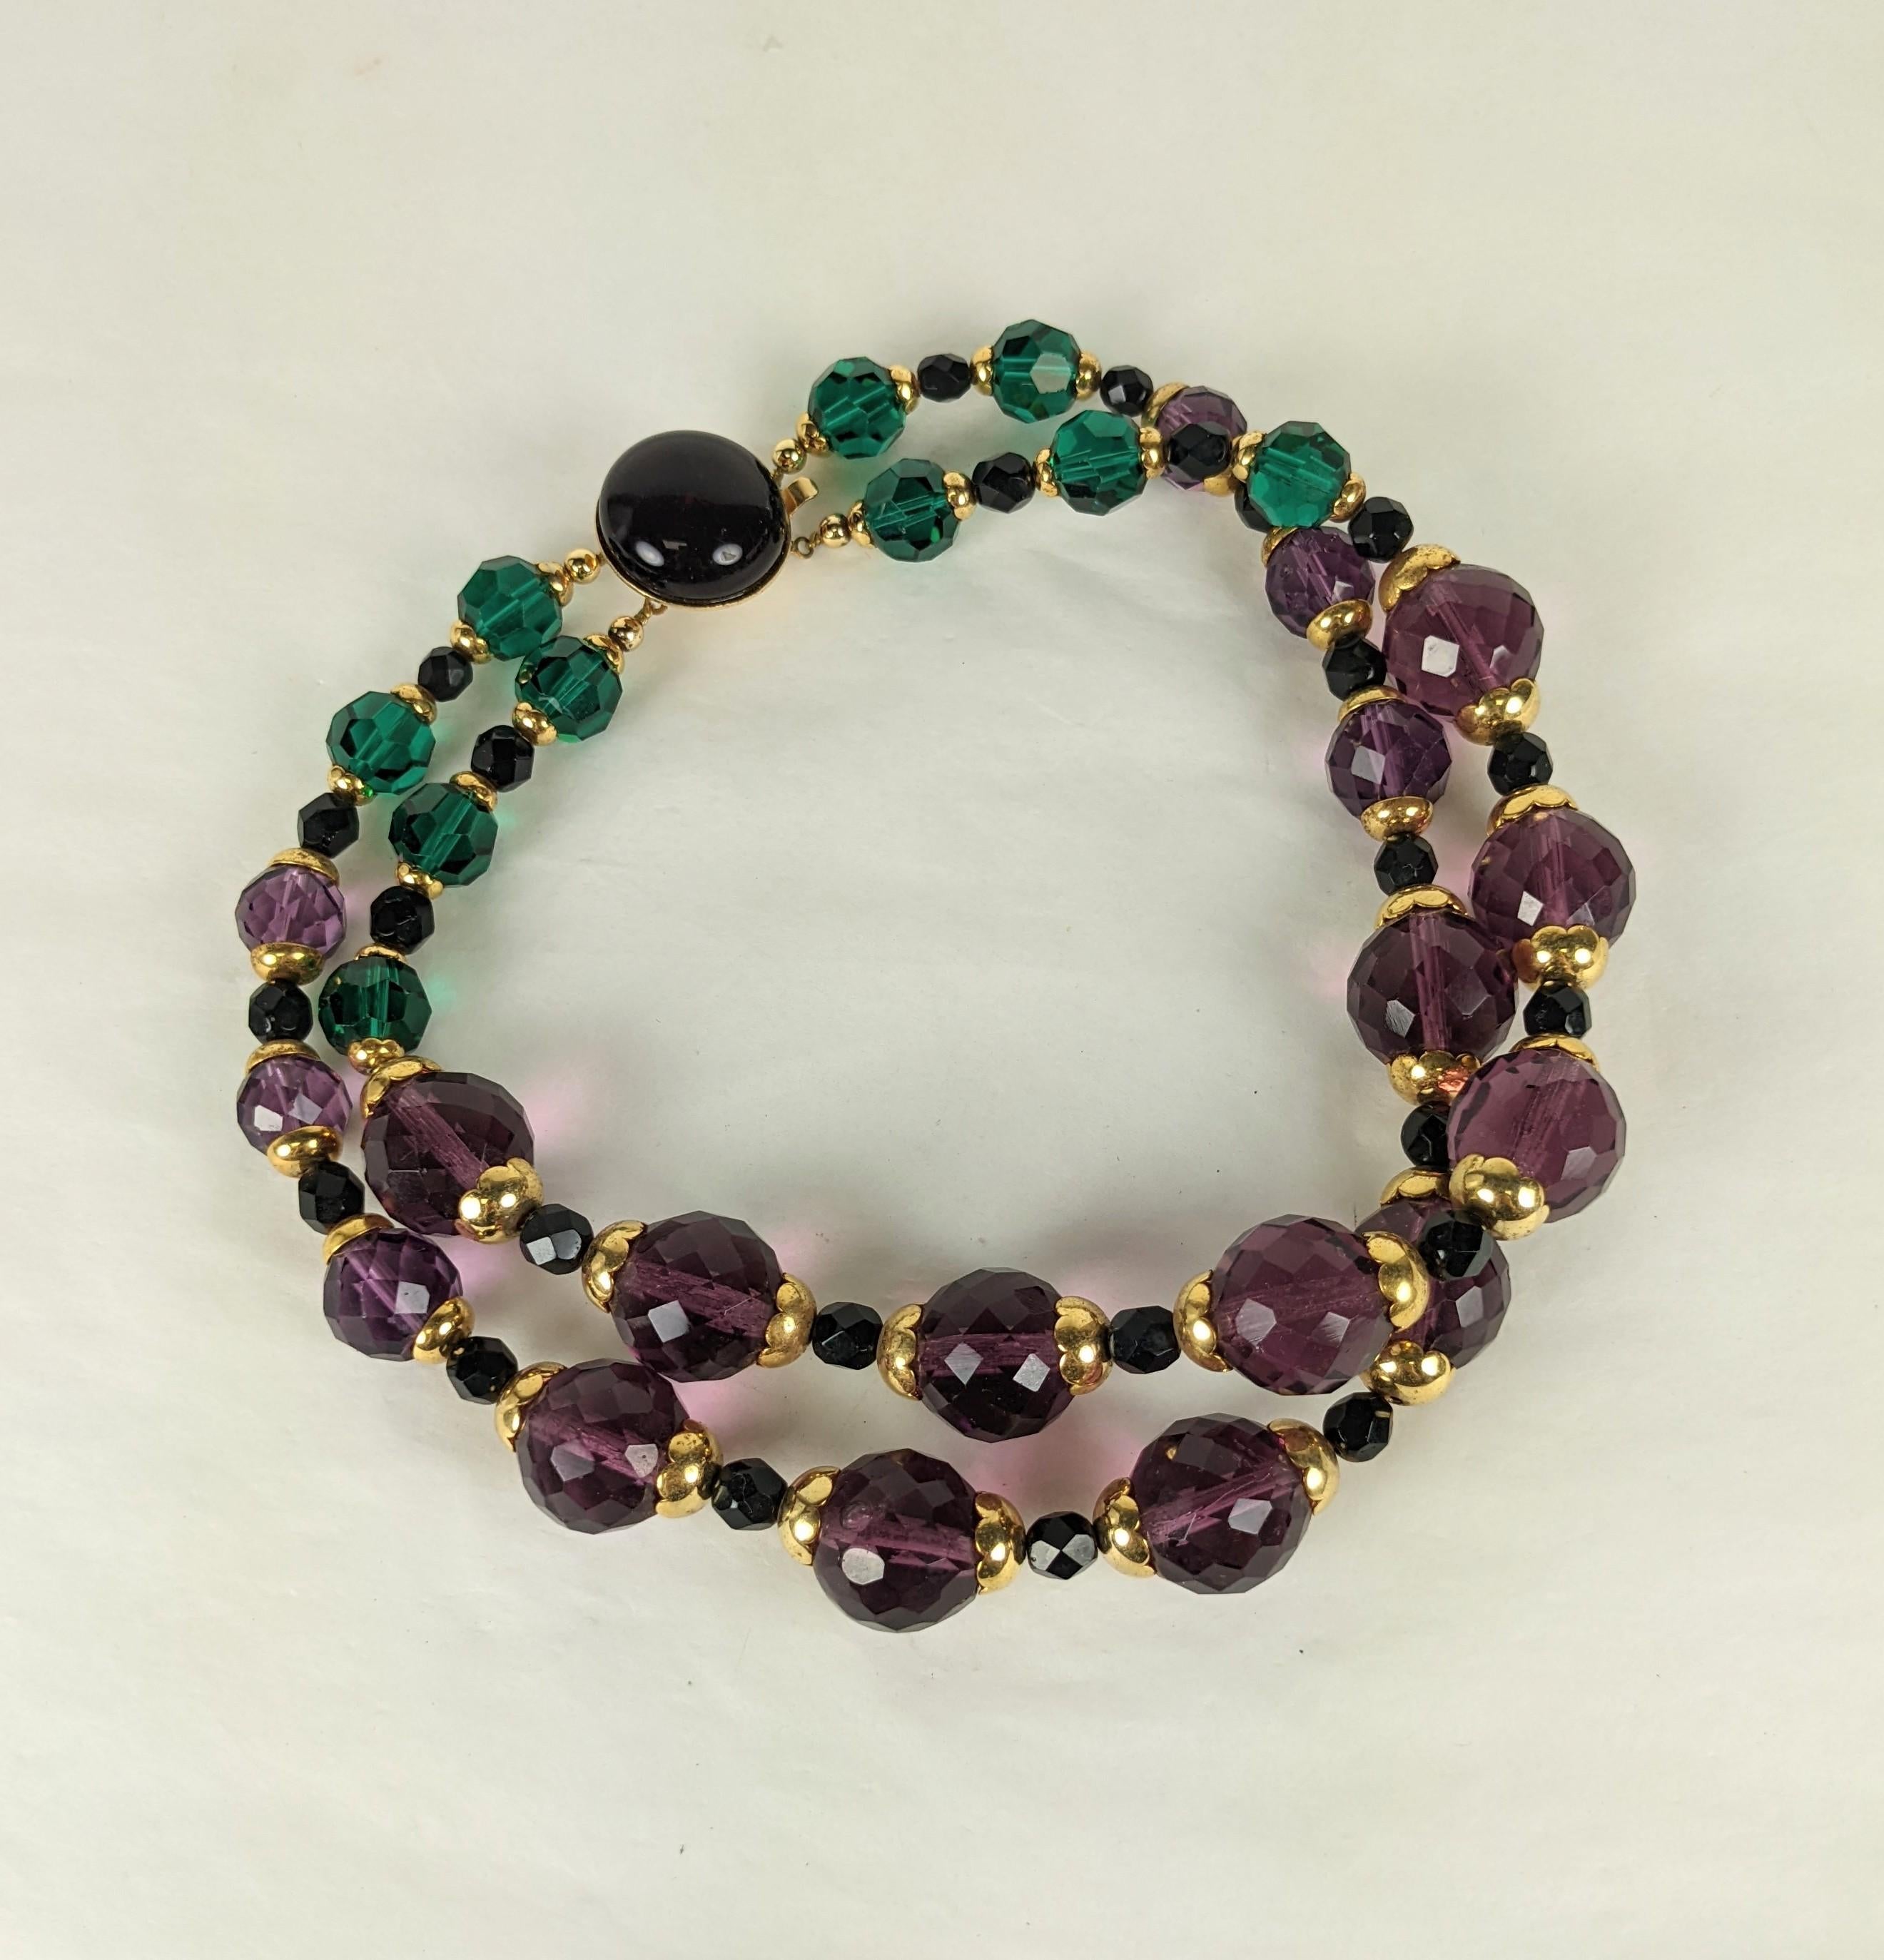 Hubert de Givenchy Haute Couture gilt metal, faux faceted amythest, emerald crystals and jet two strand choker from the estate of Bunny Mellon. Made in France.
Unsigned Haute Couture, Very Small size. Excellent Condition.  
L 14.75